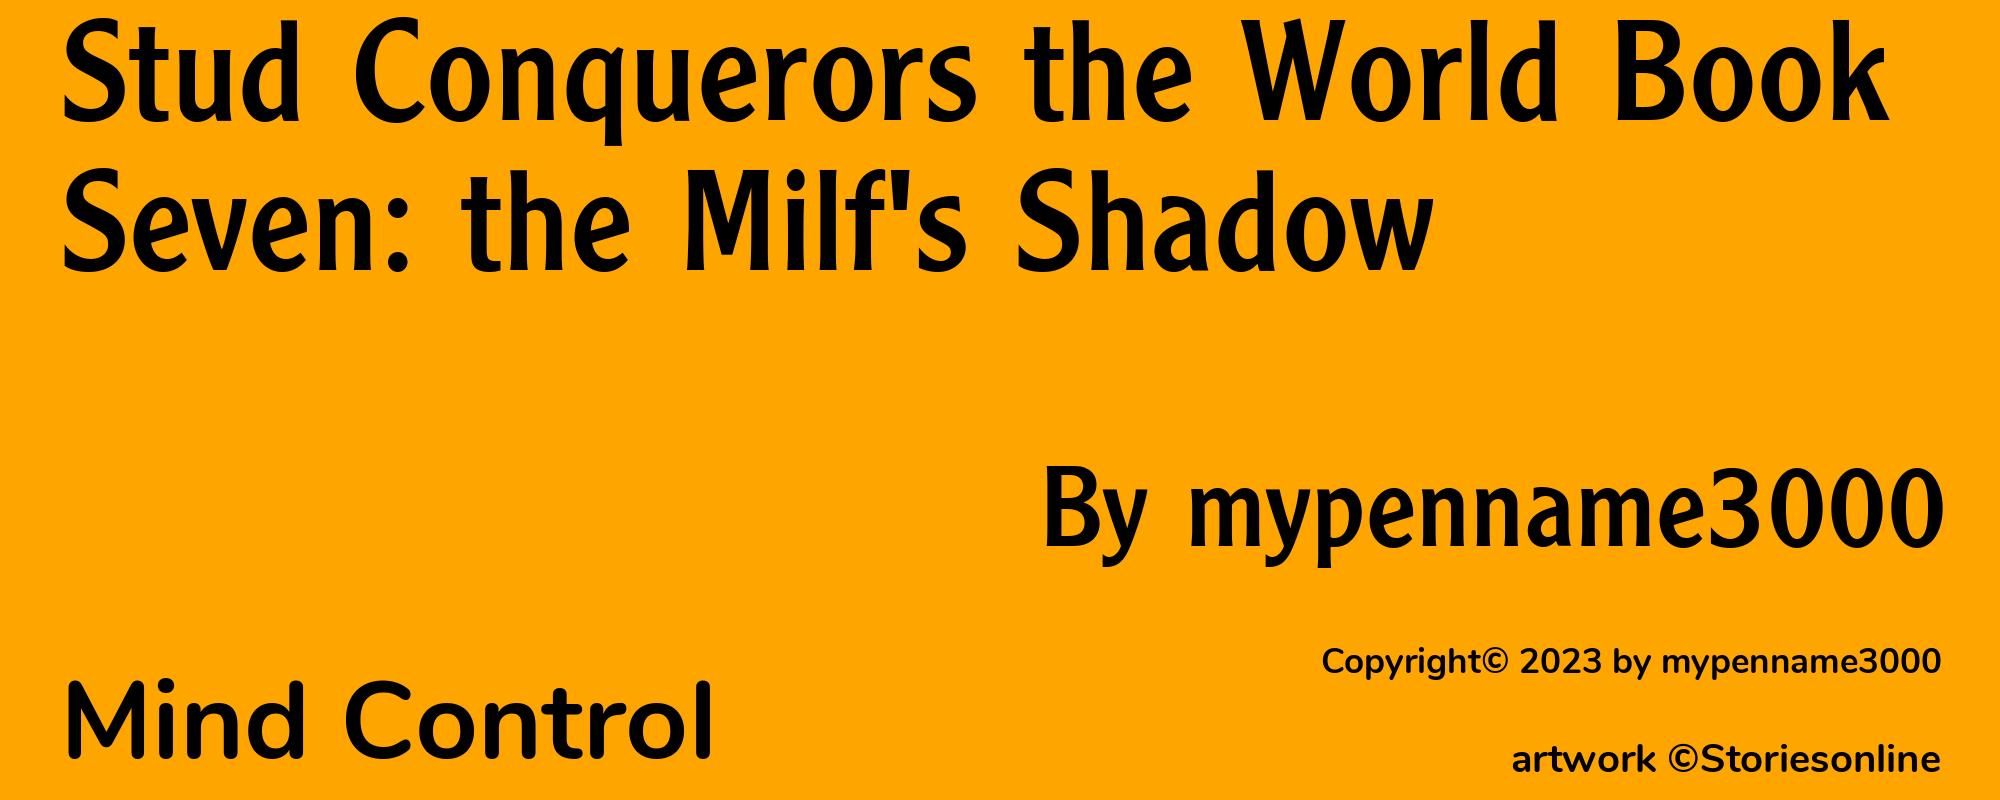 Stud Conquerors the World Book Seven: the Milf's Shadow - Cover